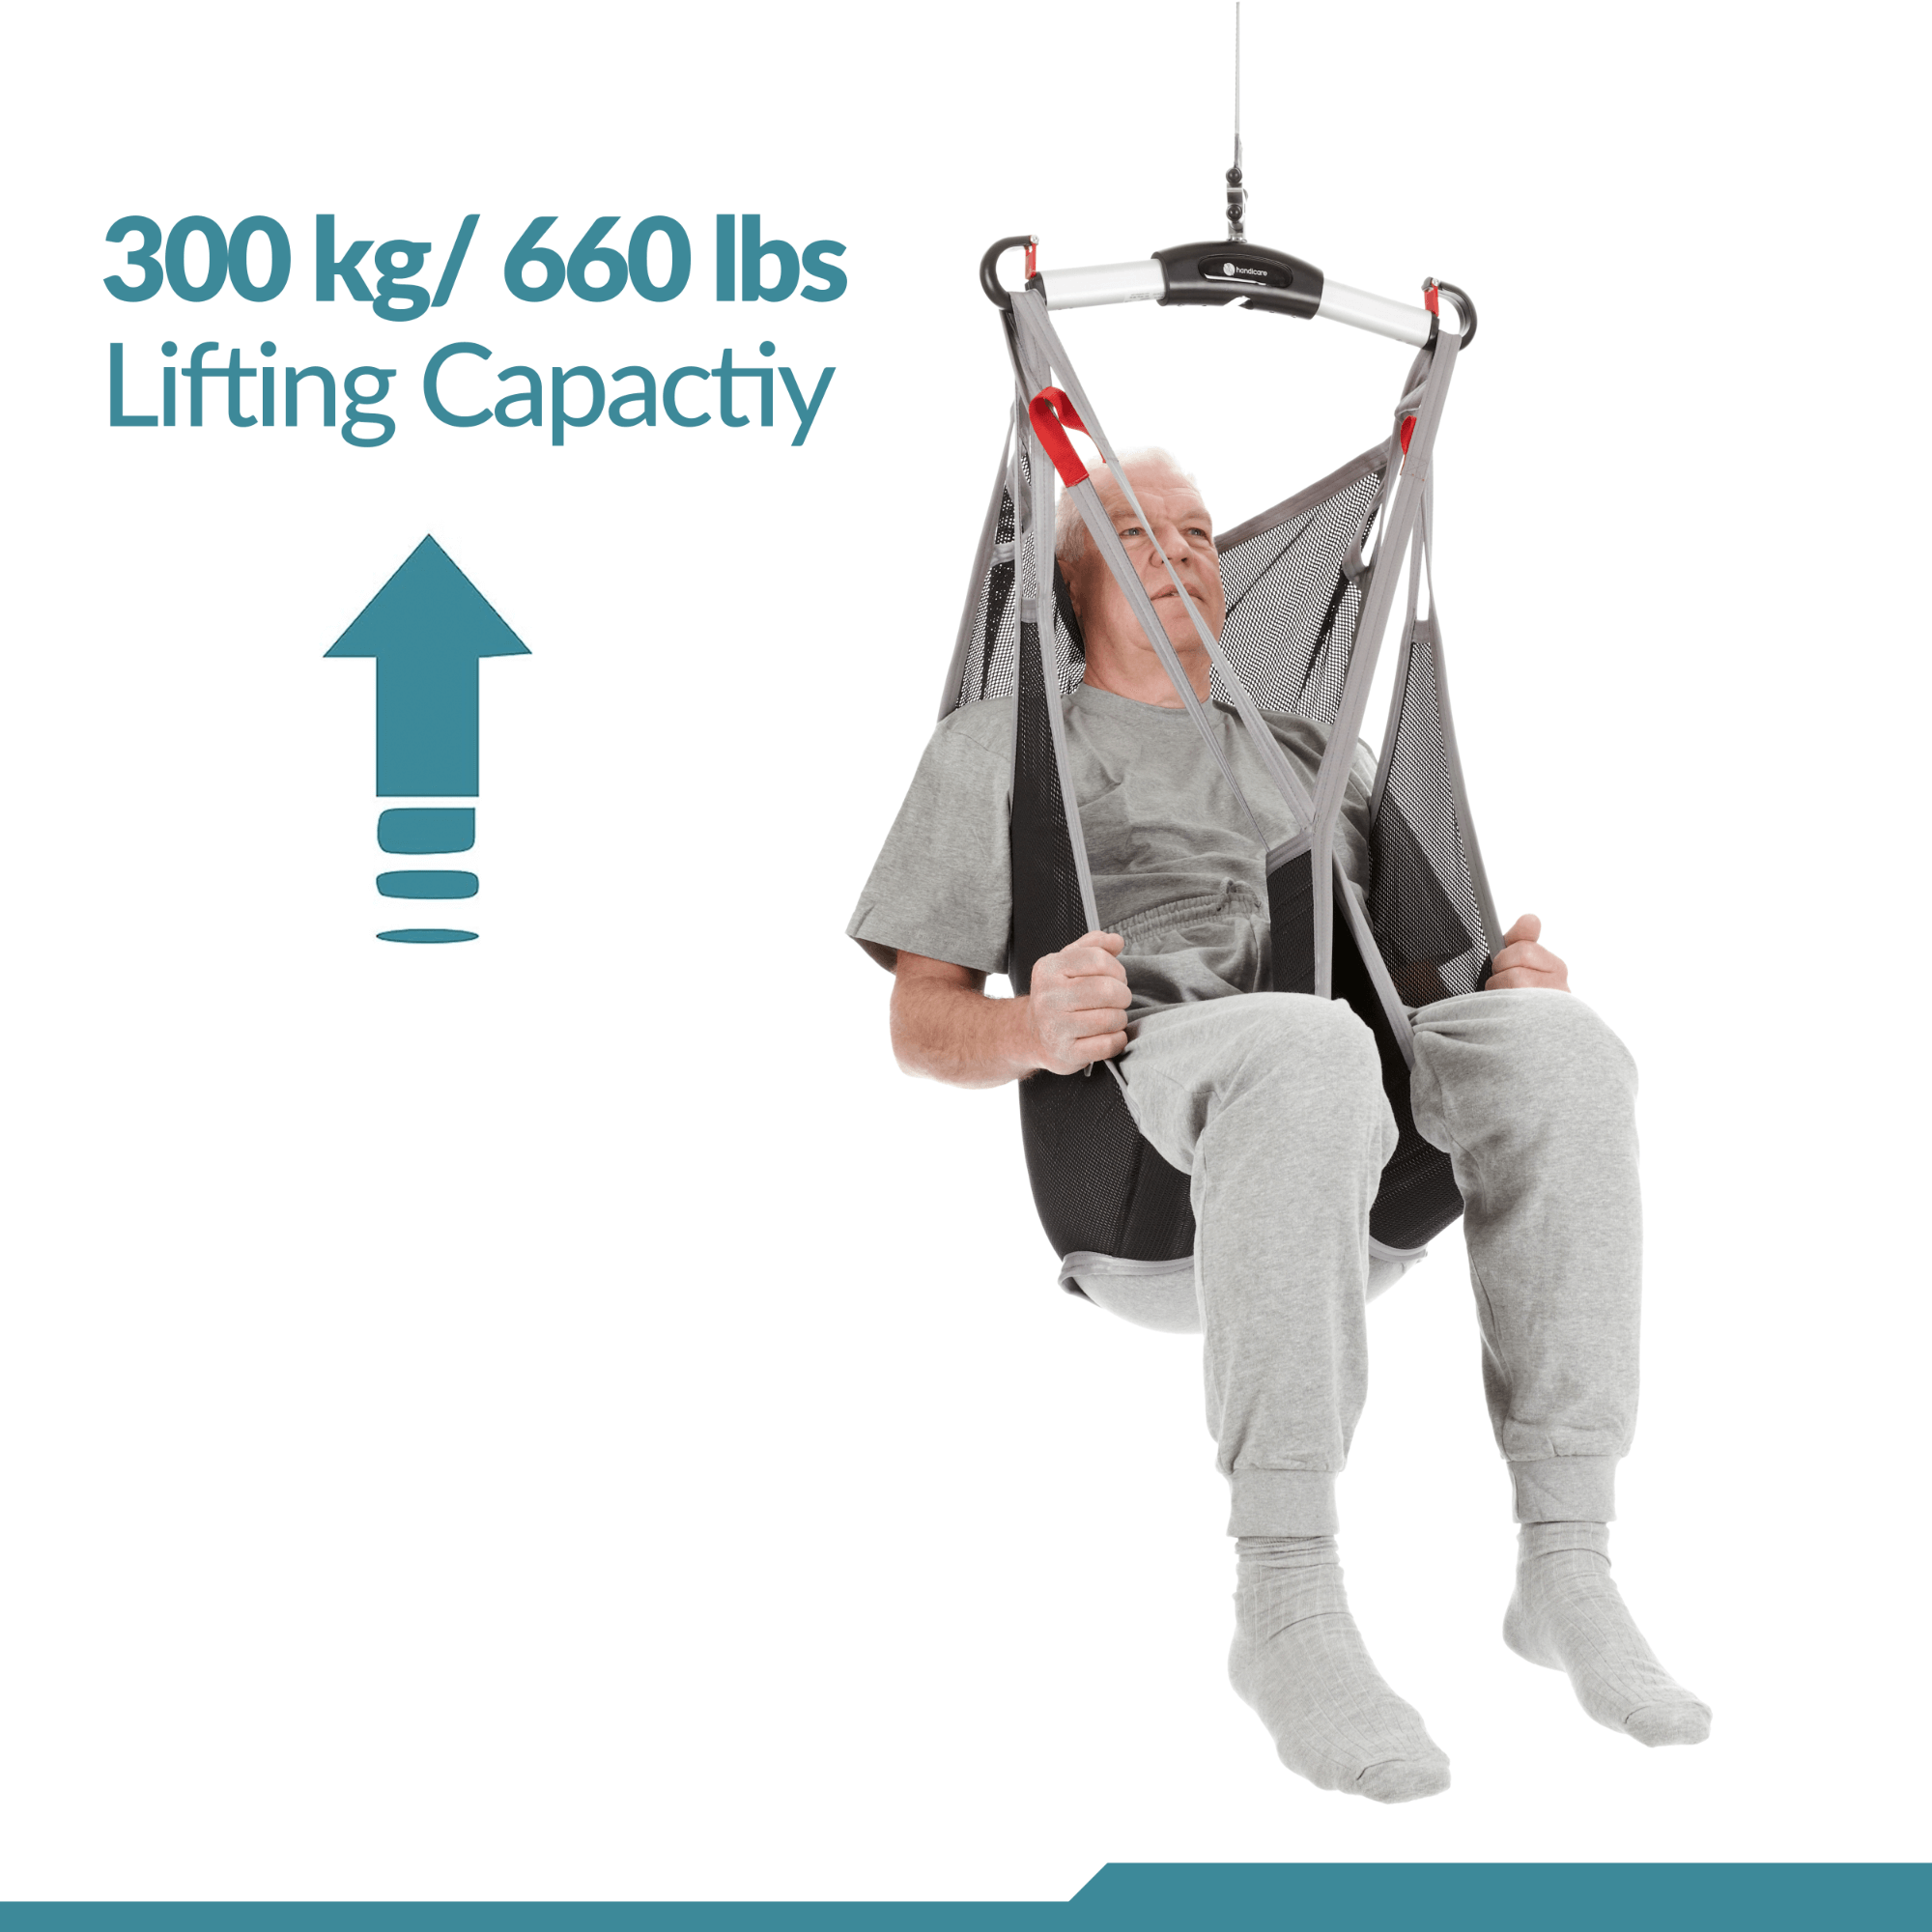 Extra Body Support Sling - Universal Patient Lift Sling for Lifts for Home Use - Transfer Safely with Patient Lifter - Compatible with Hoyer Lift - Easy-to-Use